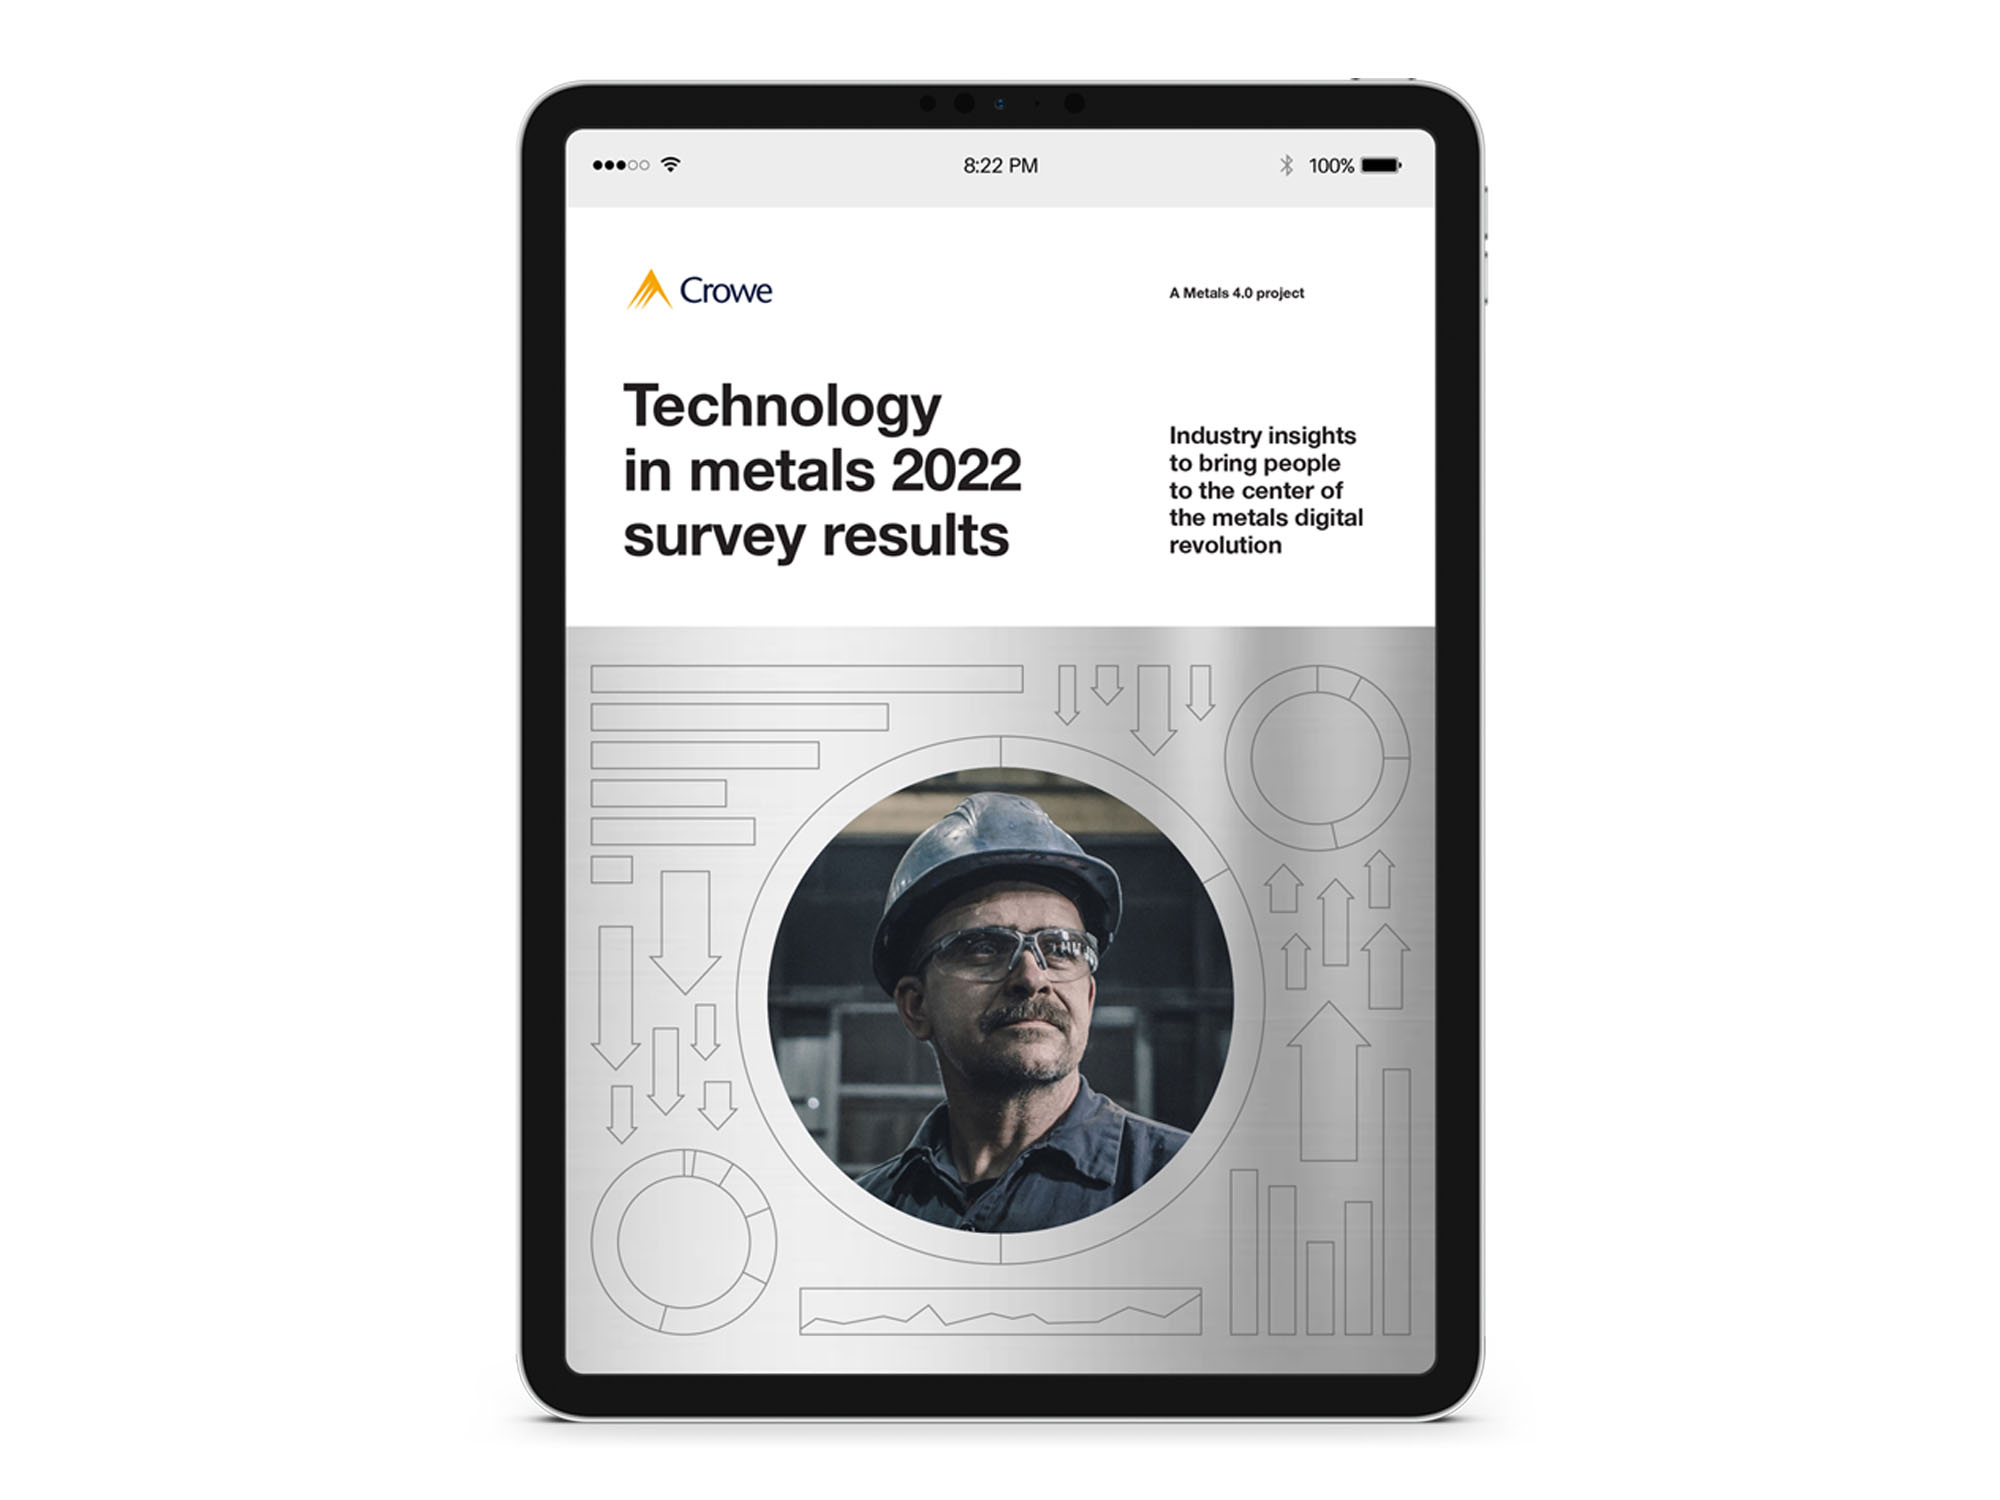 The future is Metals 4.0. Are you ready?